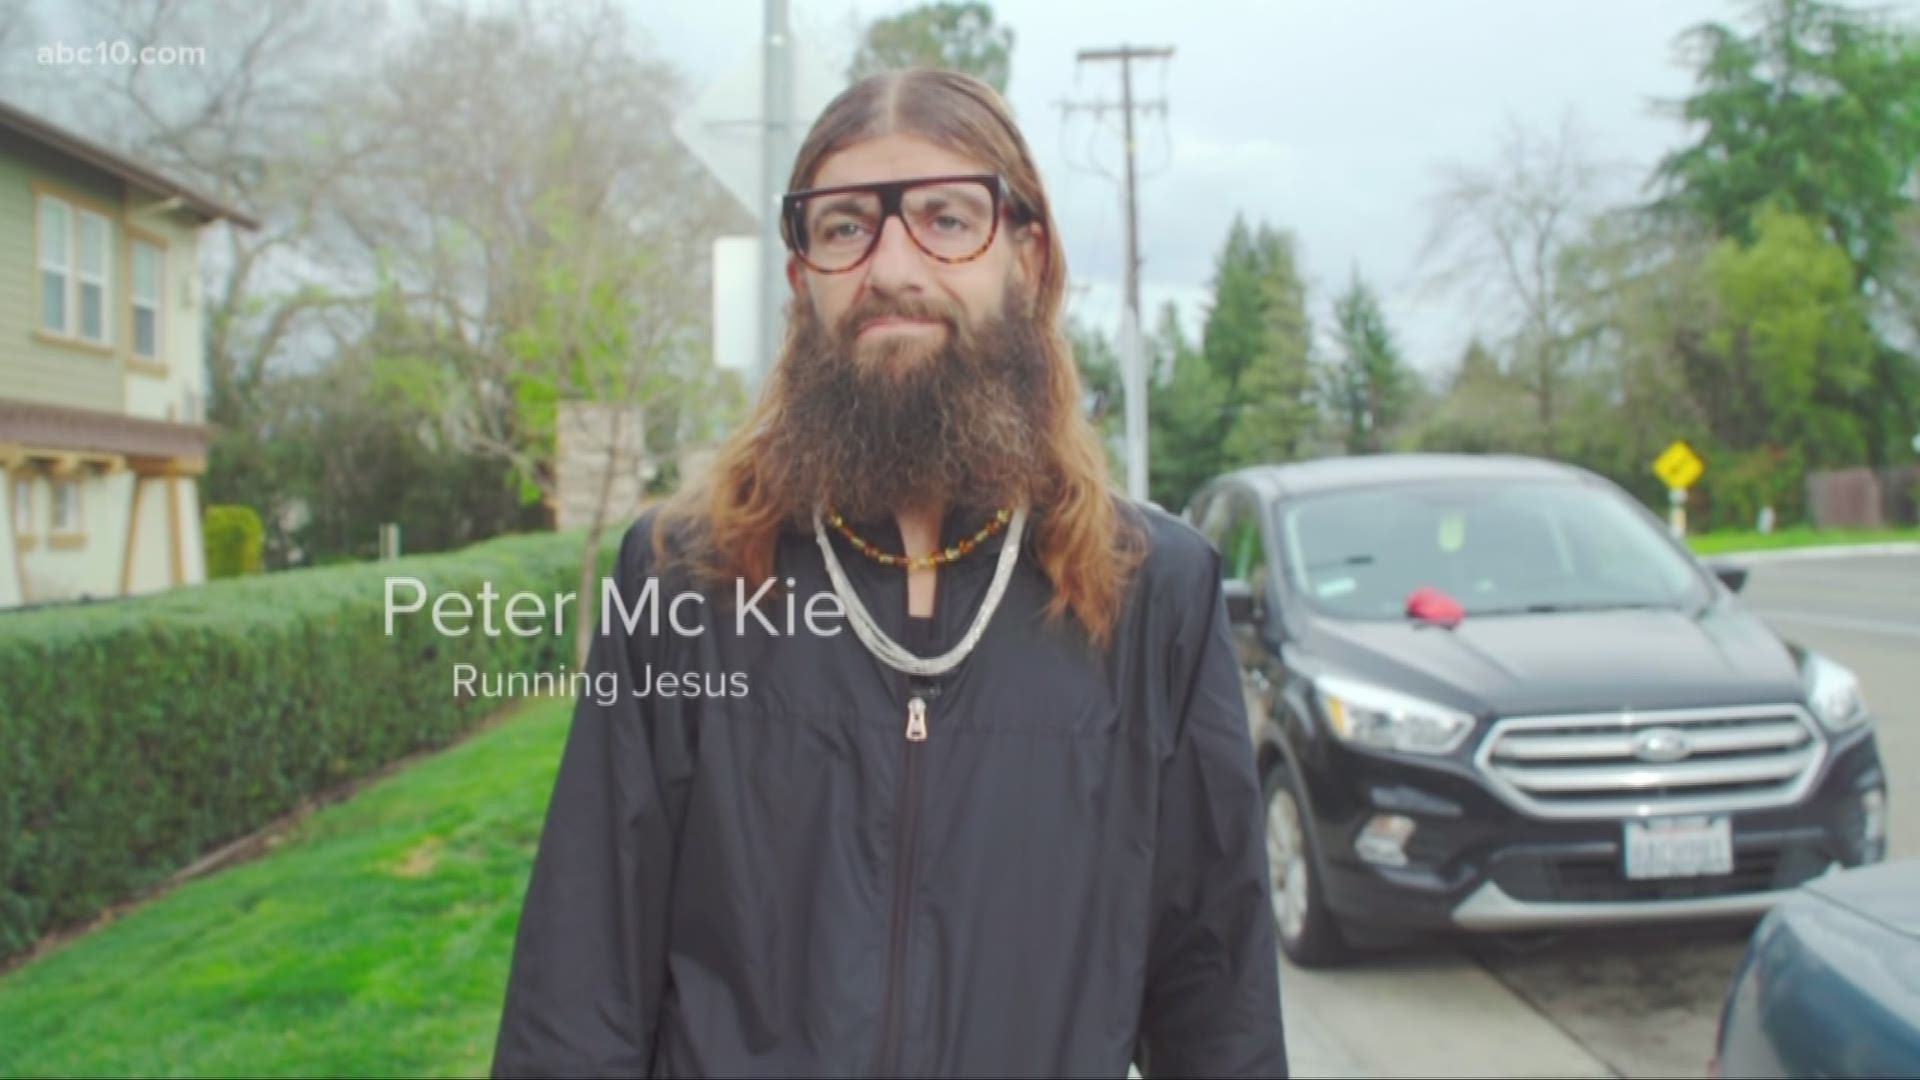 Running Jesus and a historic display. Keristen Holmes has some of your local headlines.